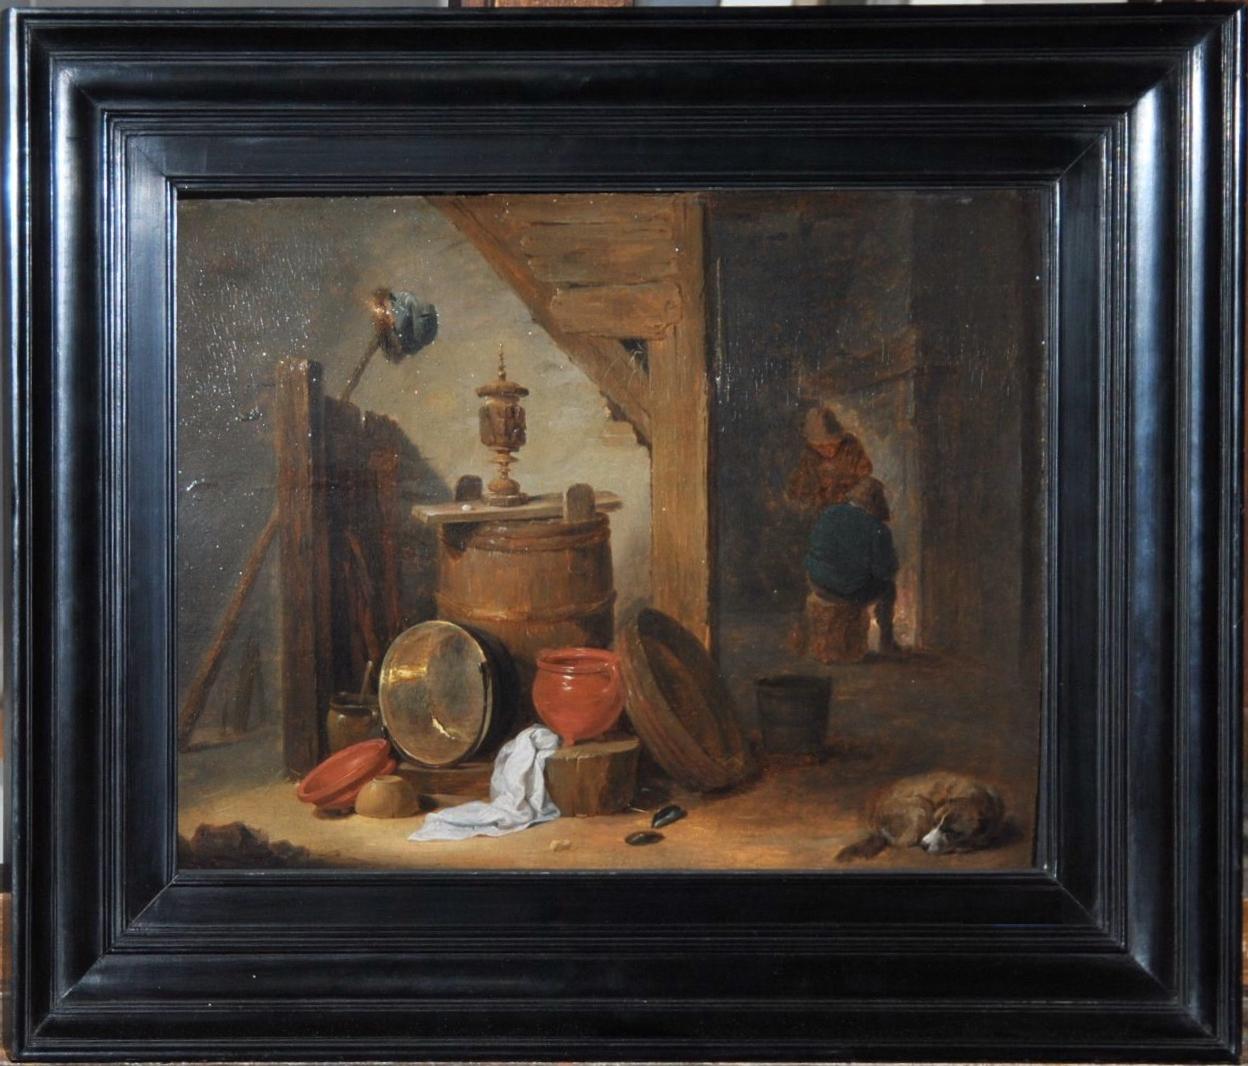 A tavern interior with a dog and kitchen utensils  - Painting by David Teniers the Younger